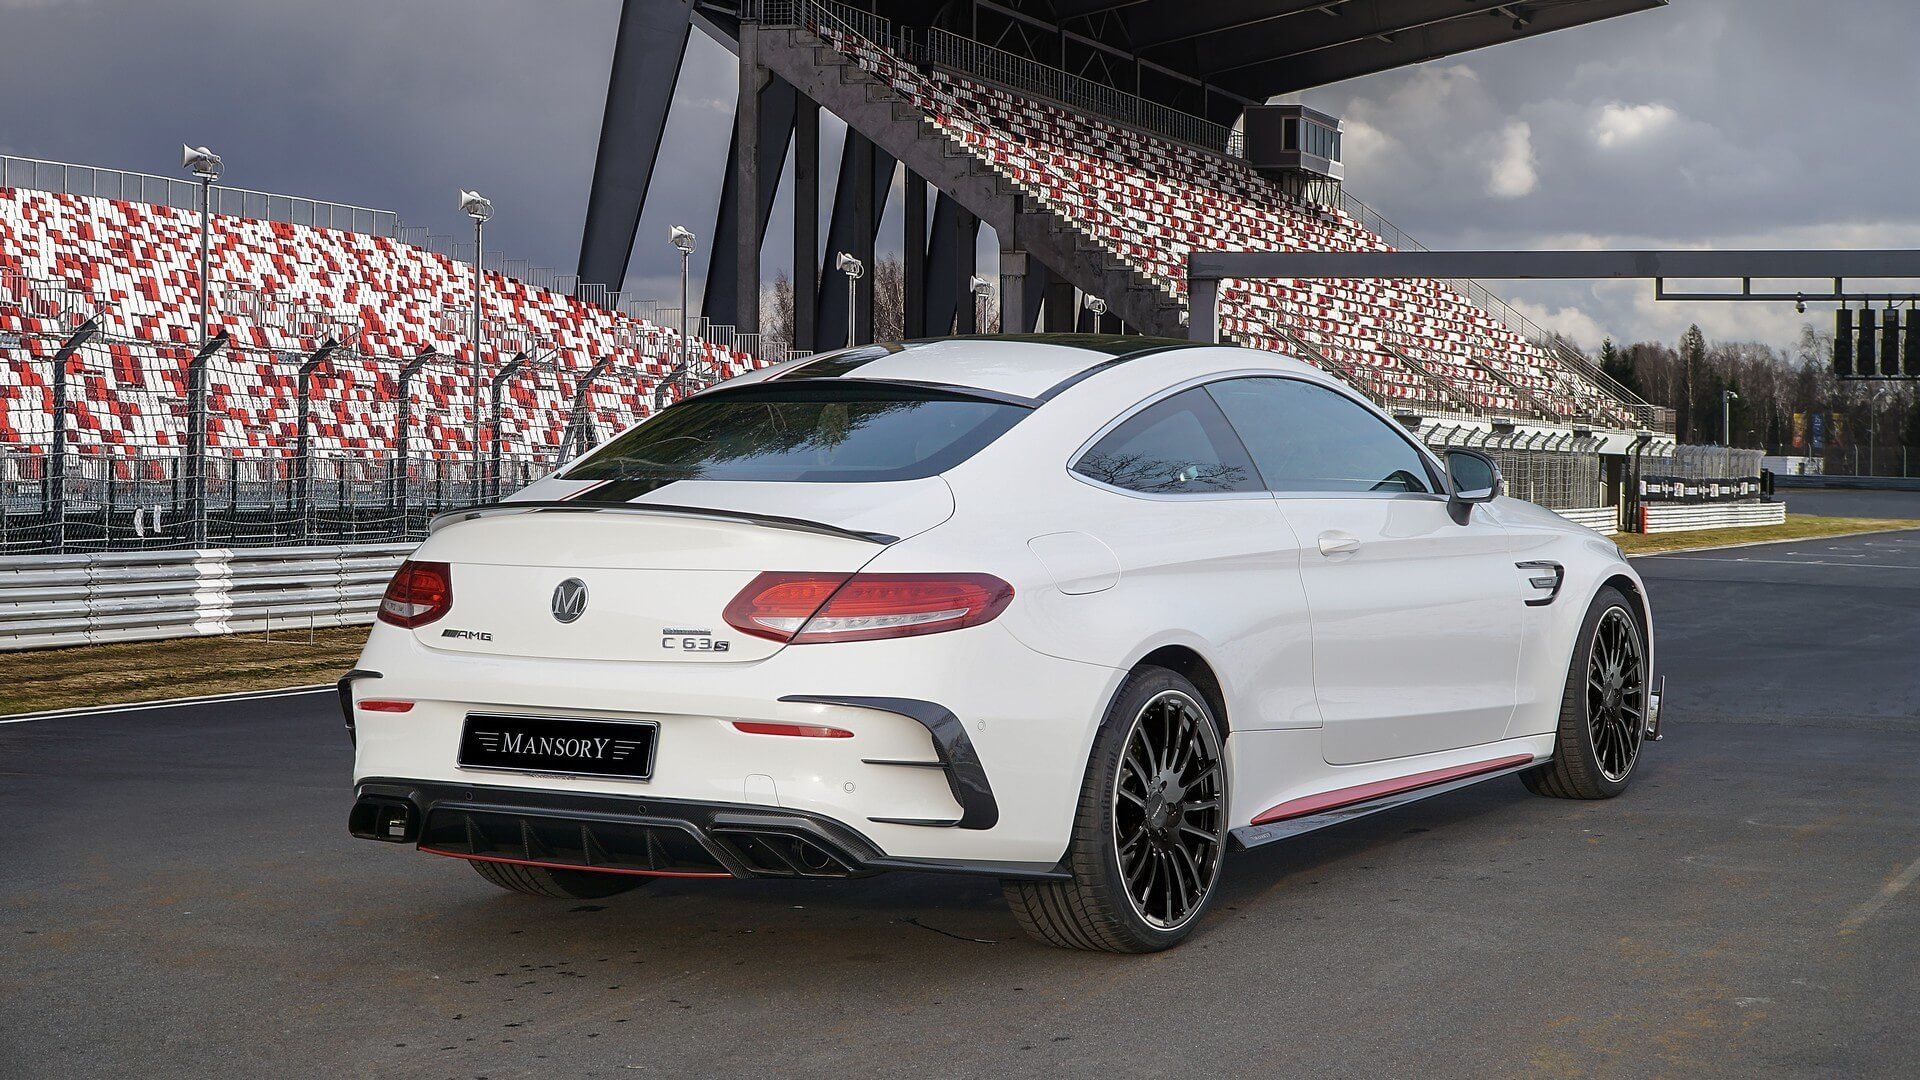 Mansory Turns Mercedes AMG C63 Into 650 HP, 193 MPH Coupe